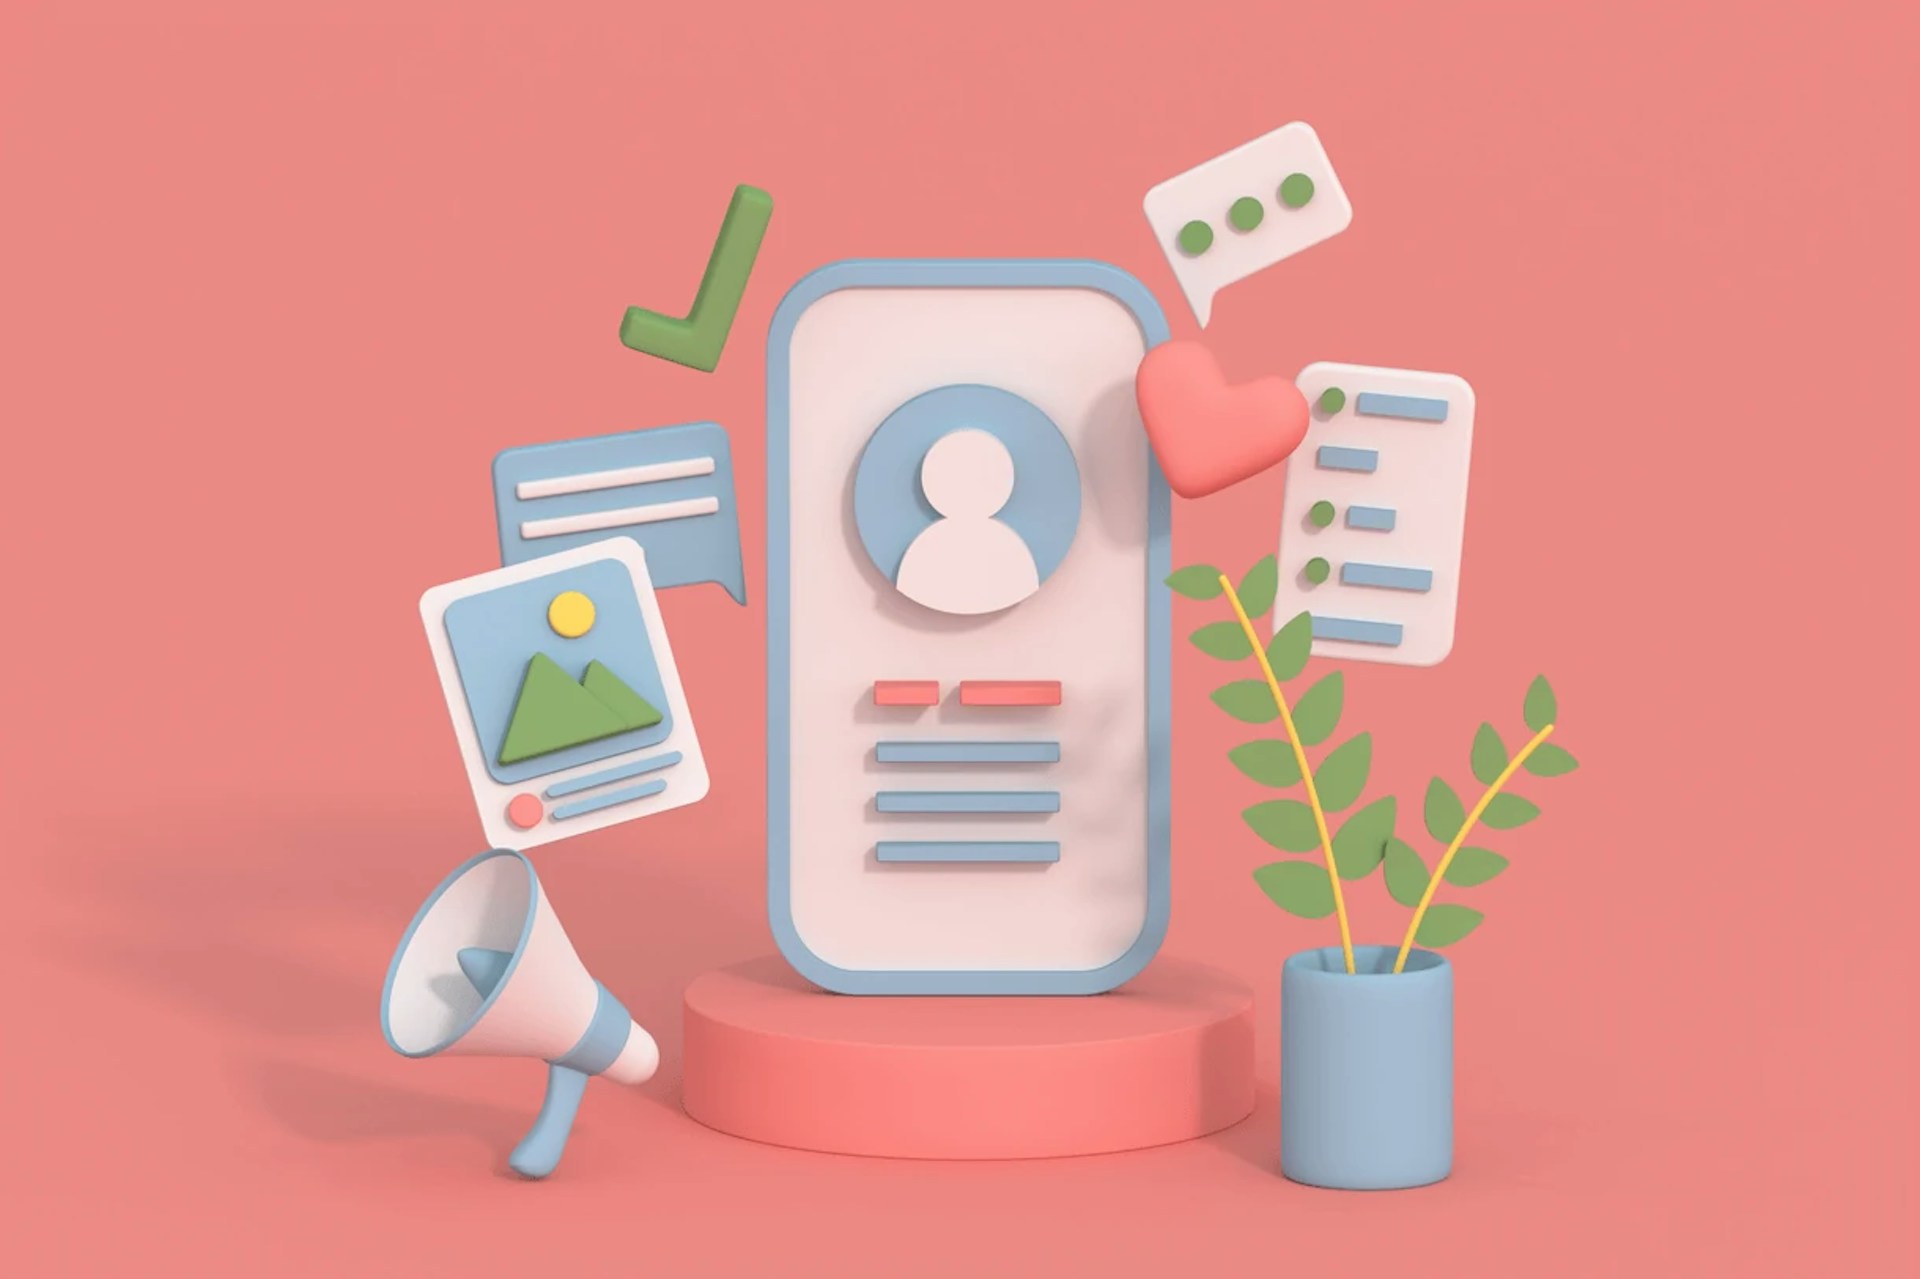 3D Illustration of a phone with influencer icons